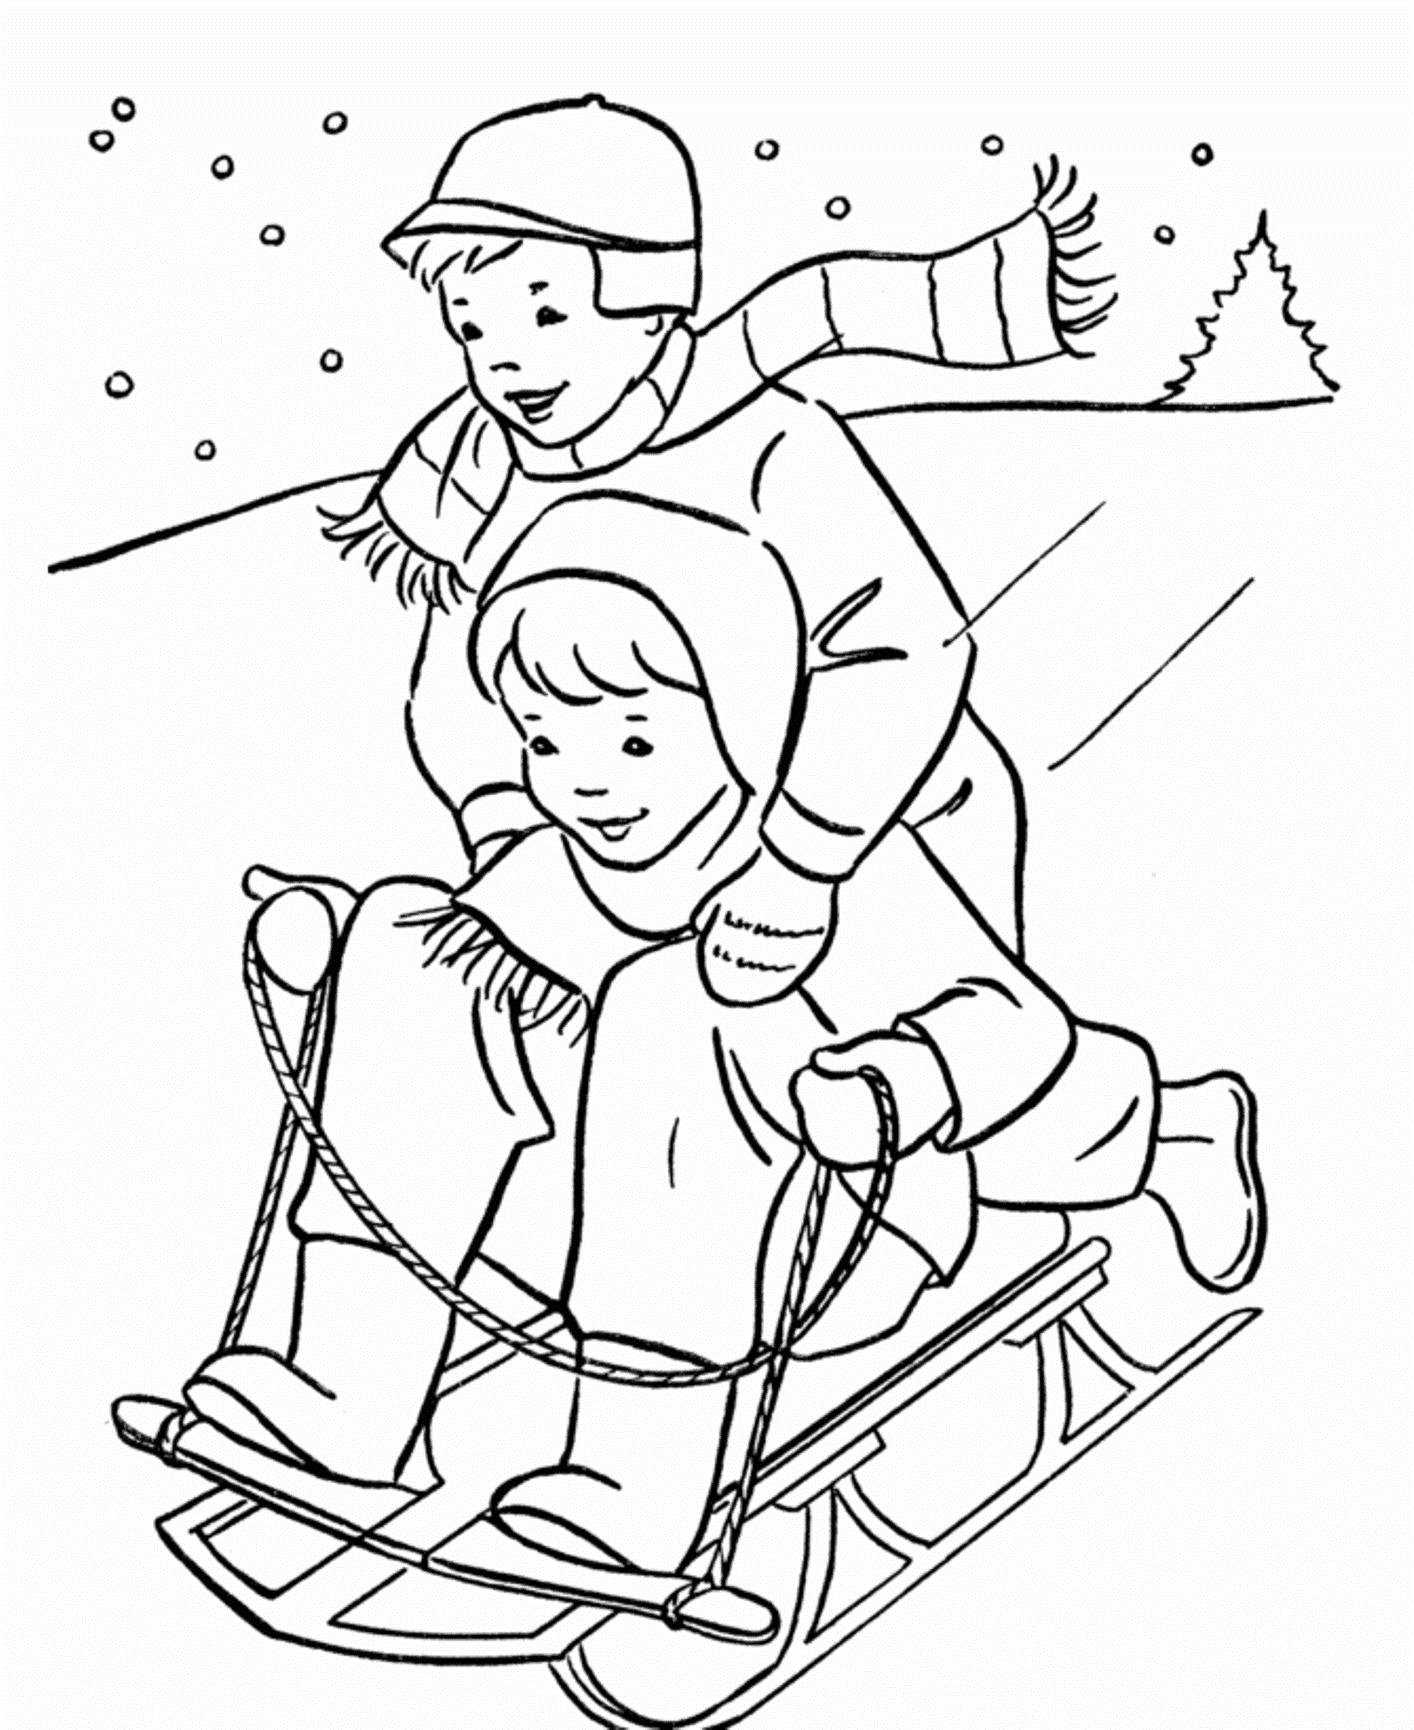 Download Coloring Pages Children Playing - Coloring Home